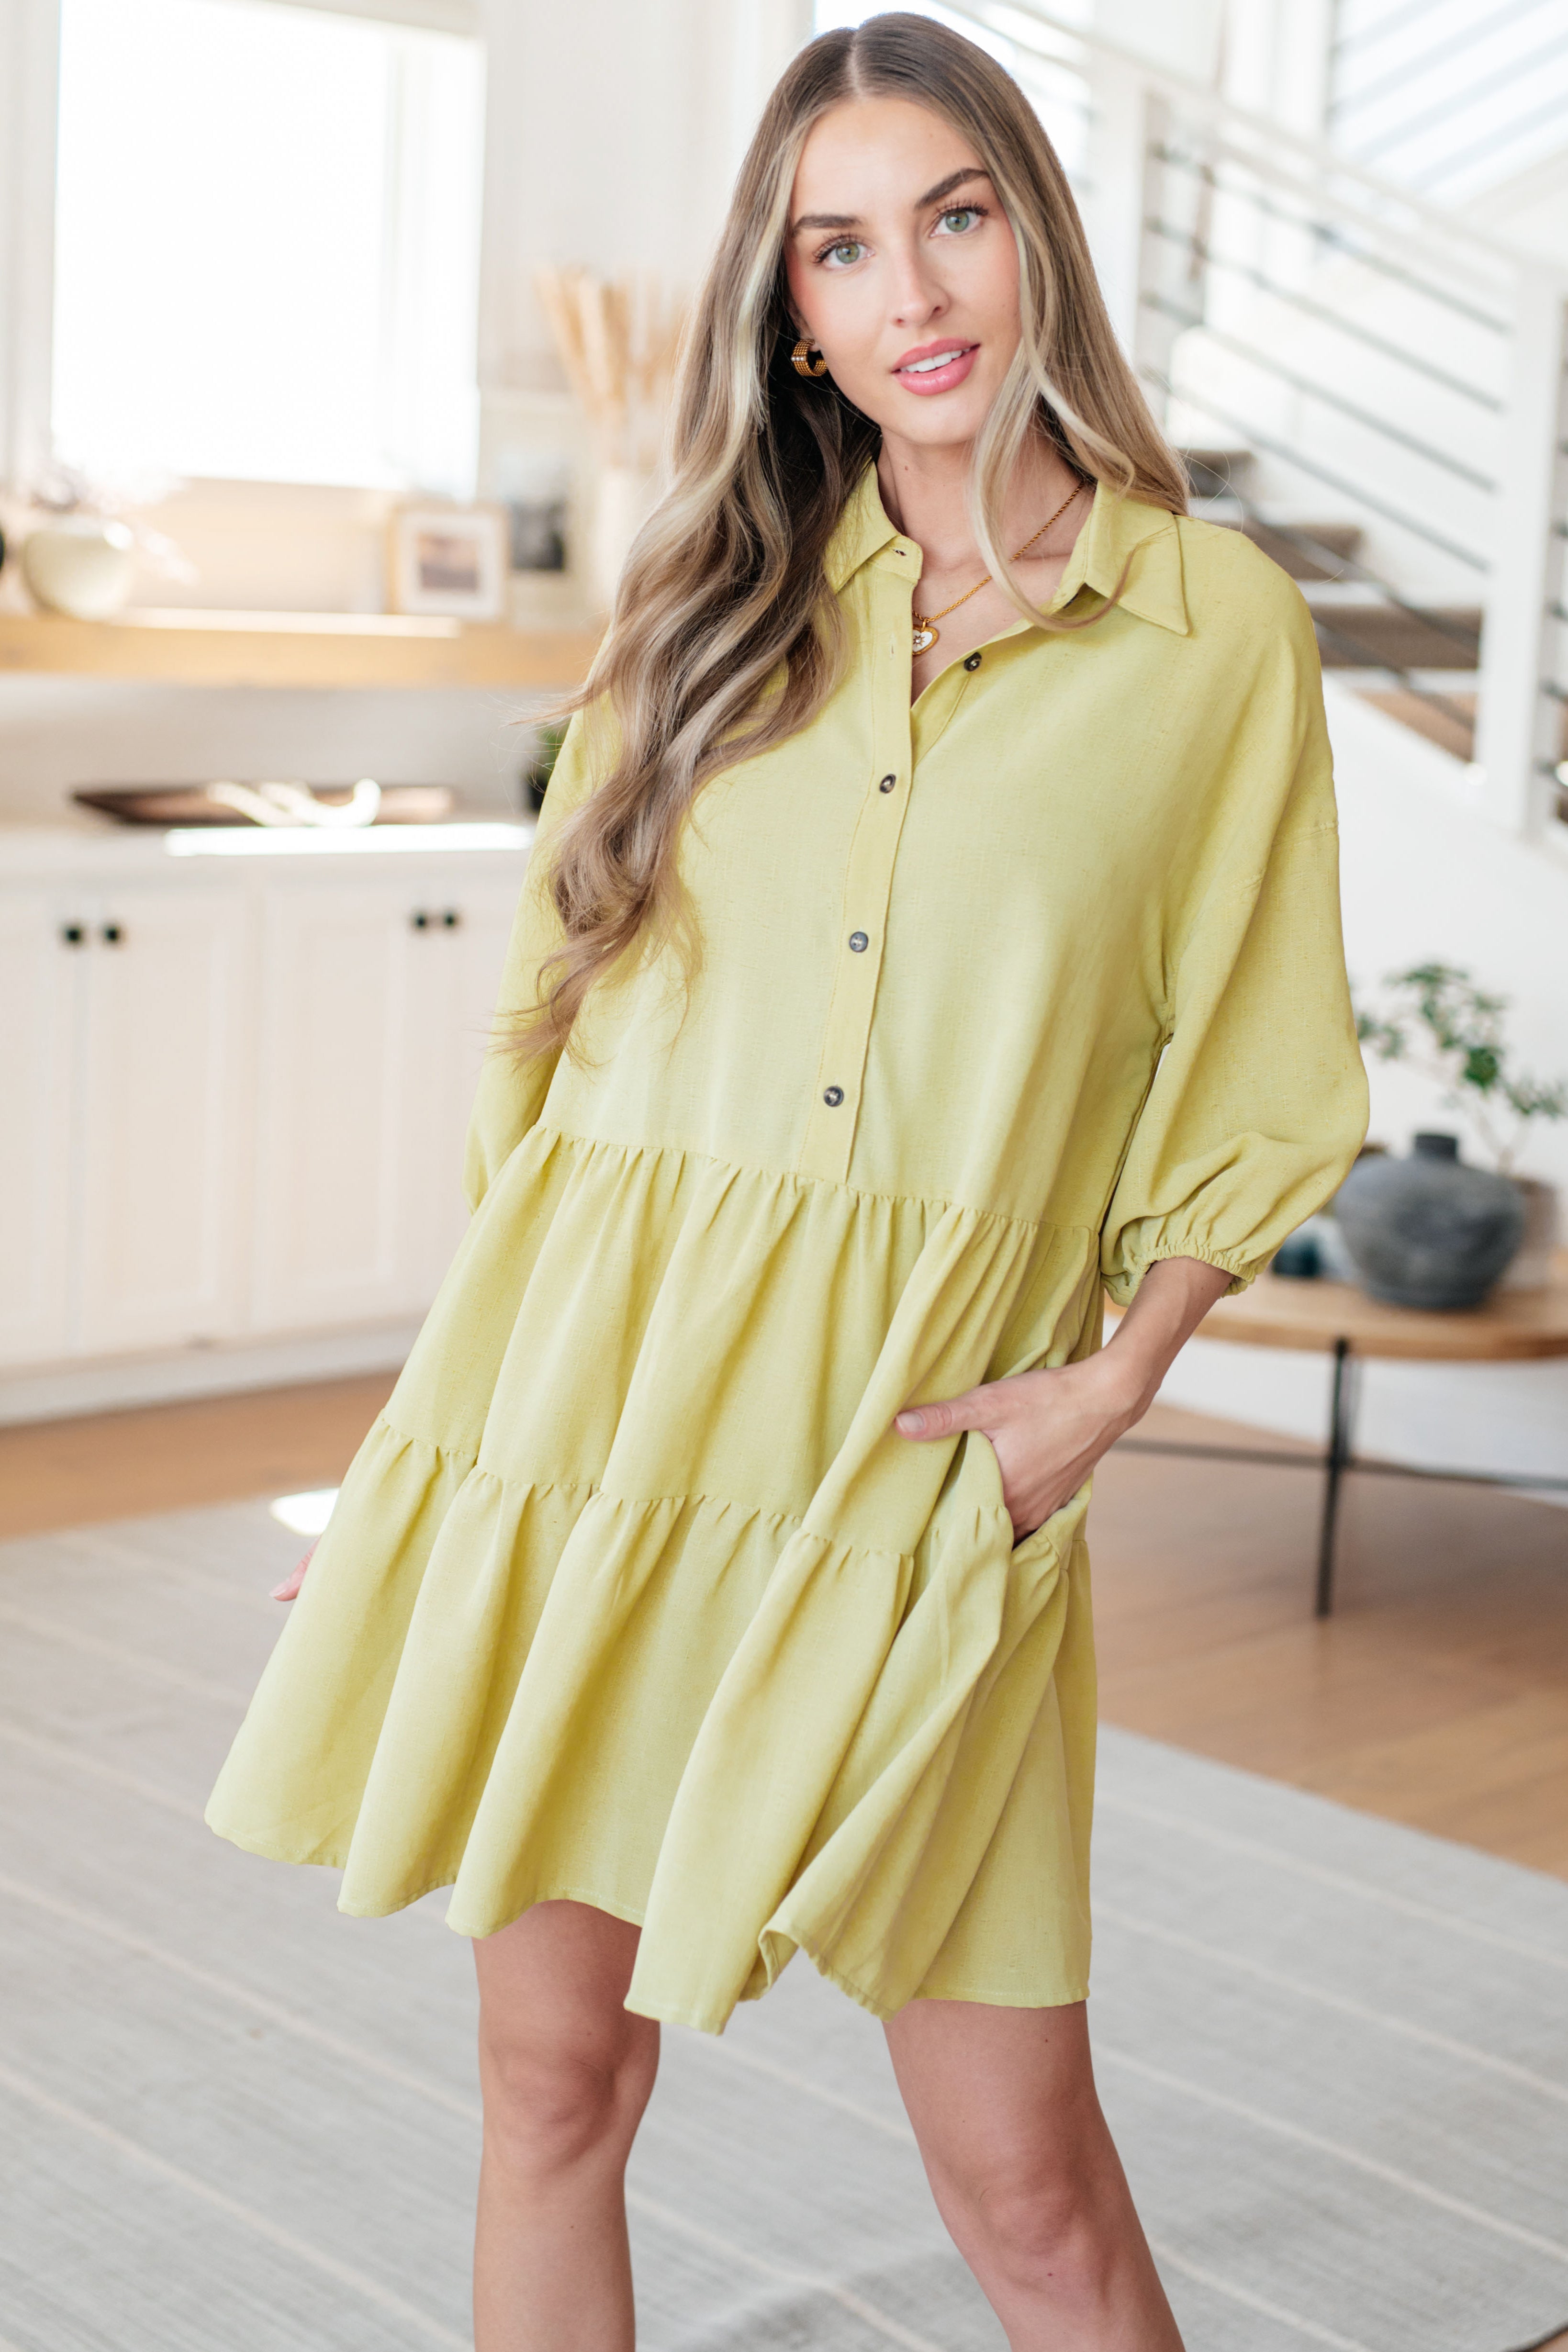 Hailey & Co. Just Like Honey Tiered Dress Ave Shops